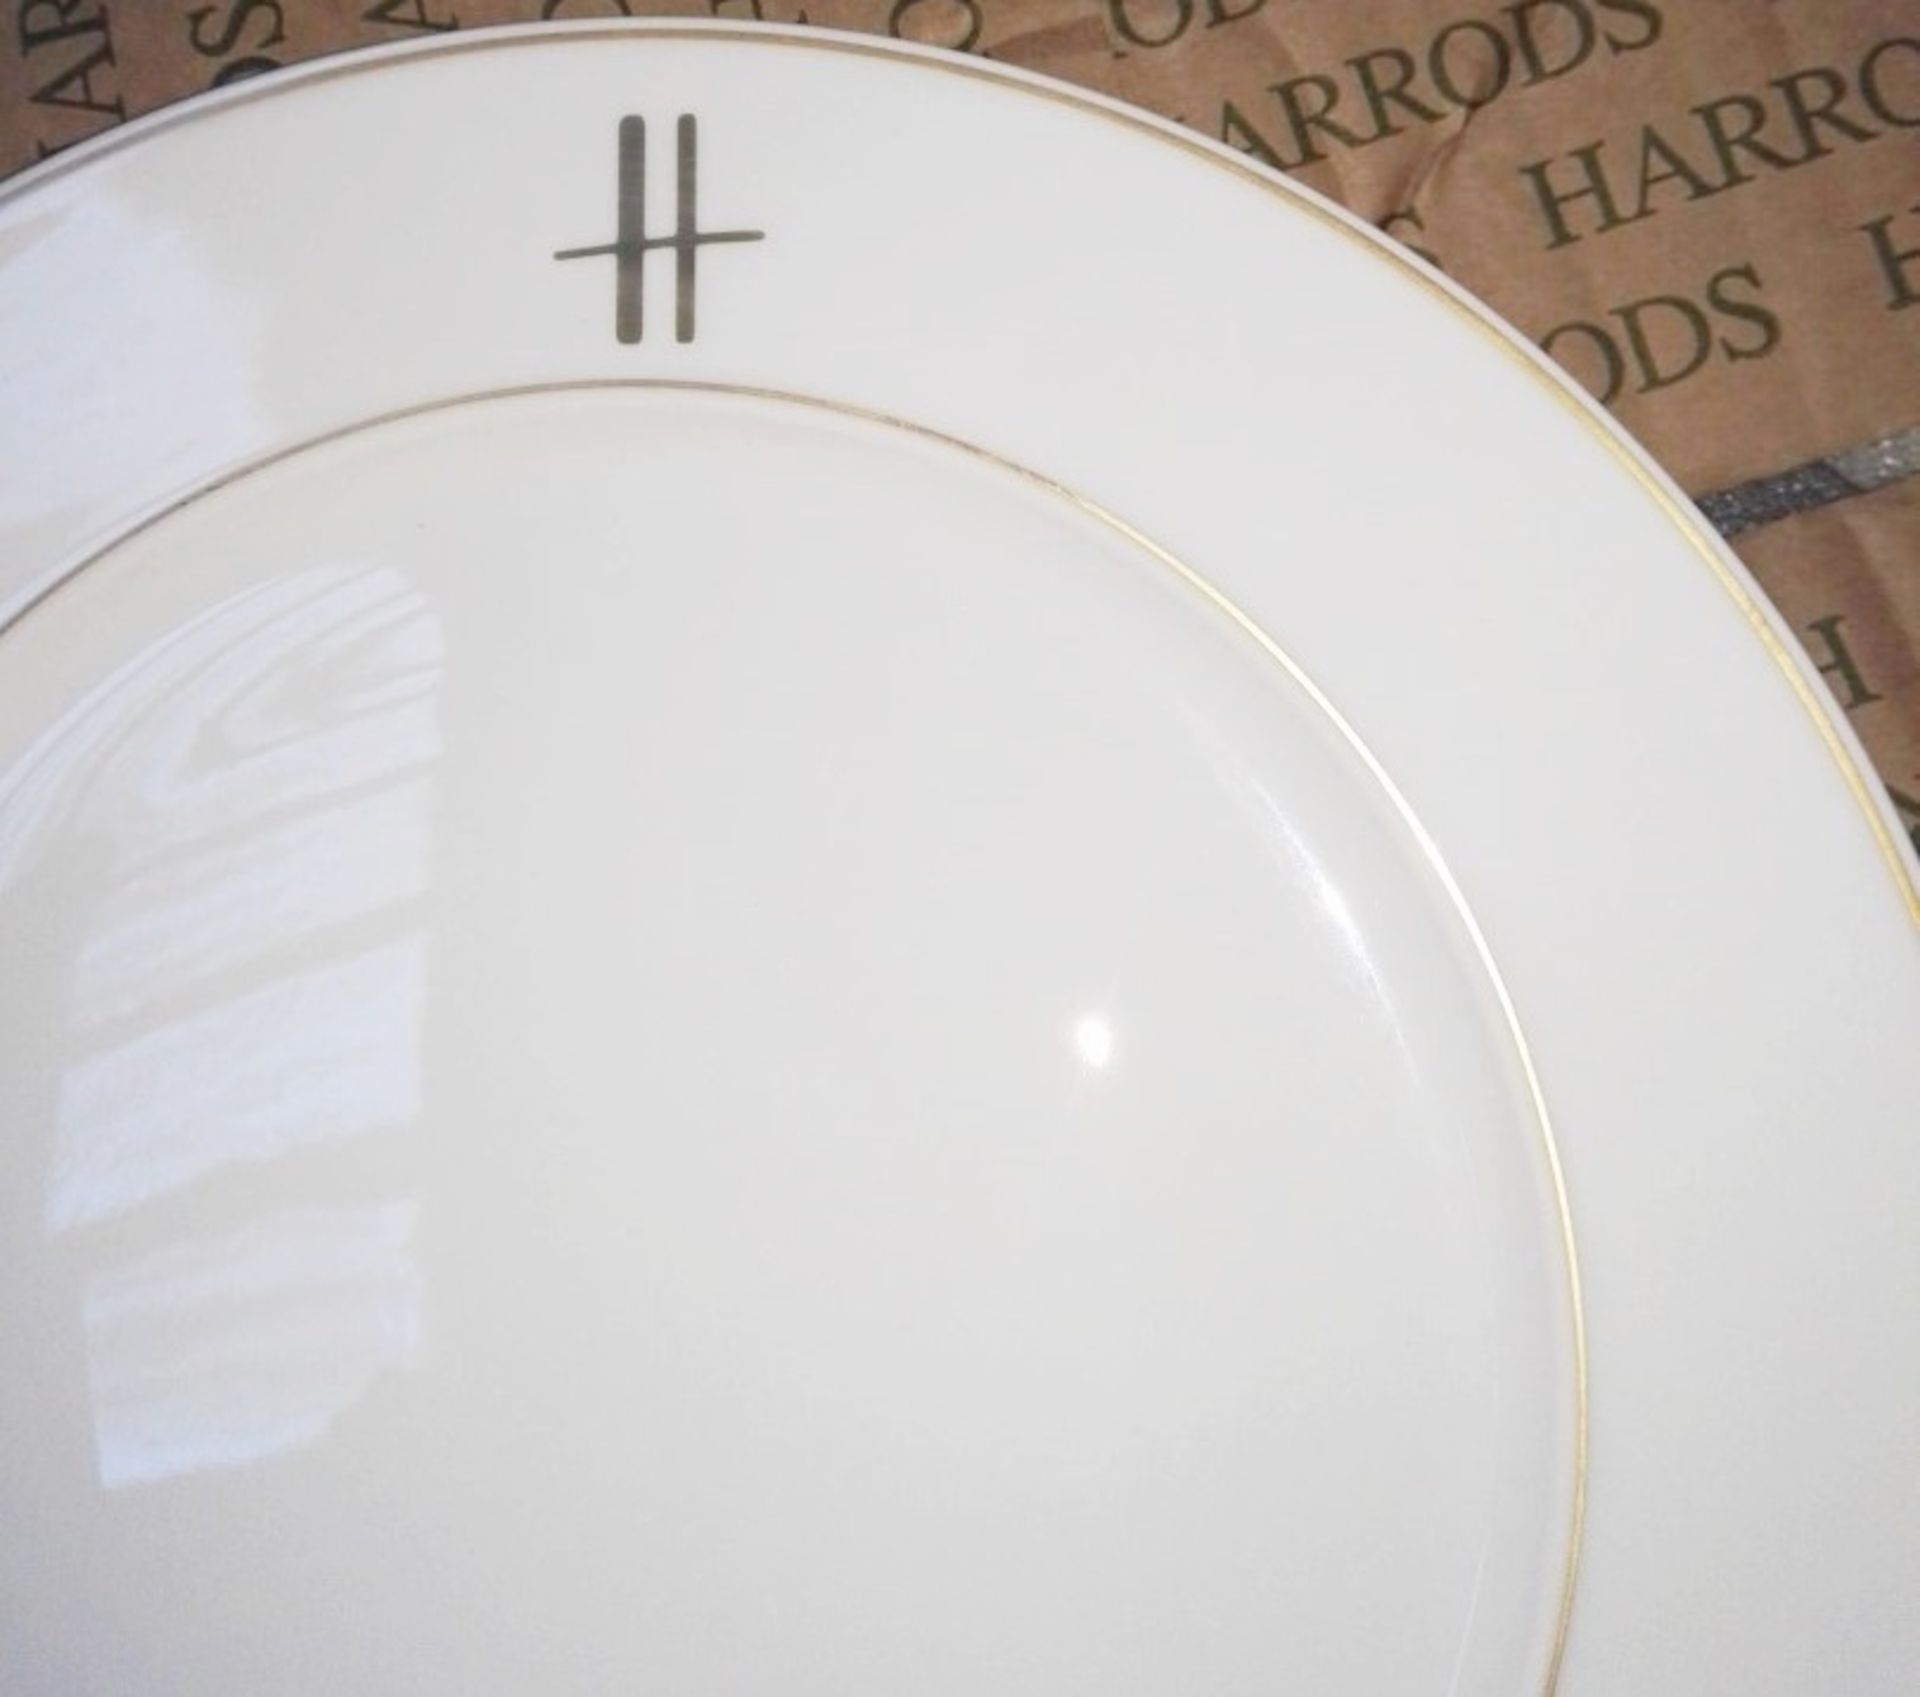 25 x PILLIVUYT Porcelain Dinner Plates In White Featuring 'Famous Branding' In Gold - Dimensions: - Image 4 of 4